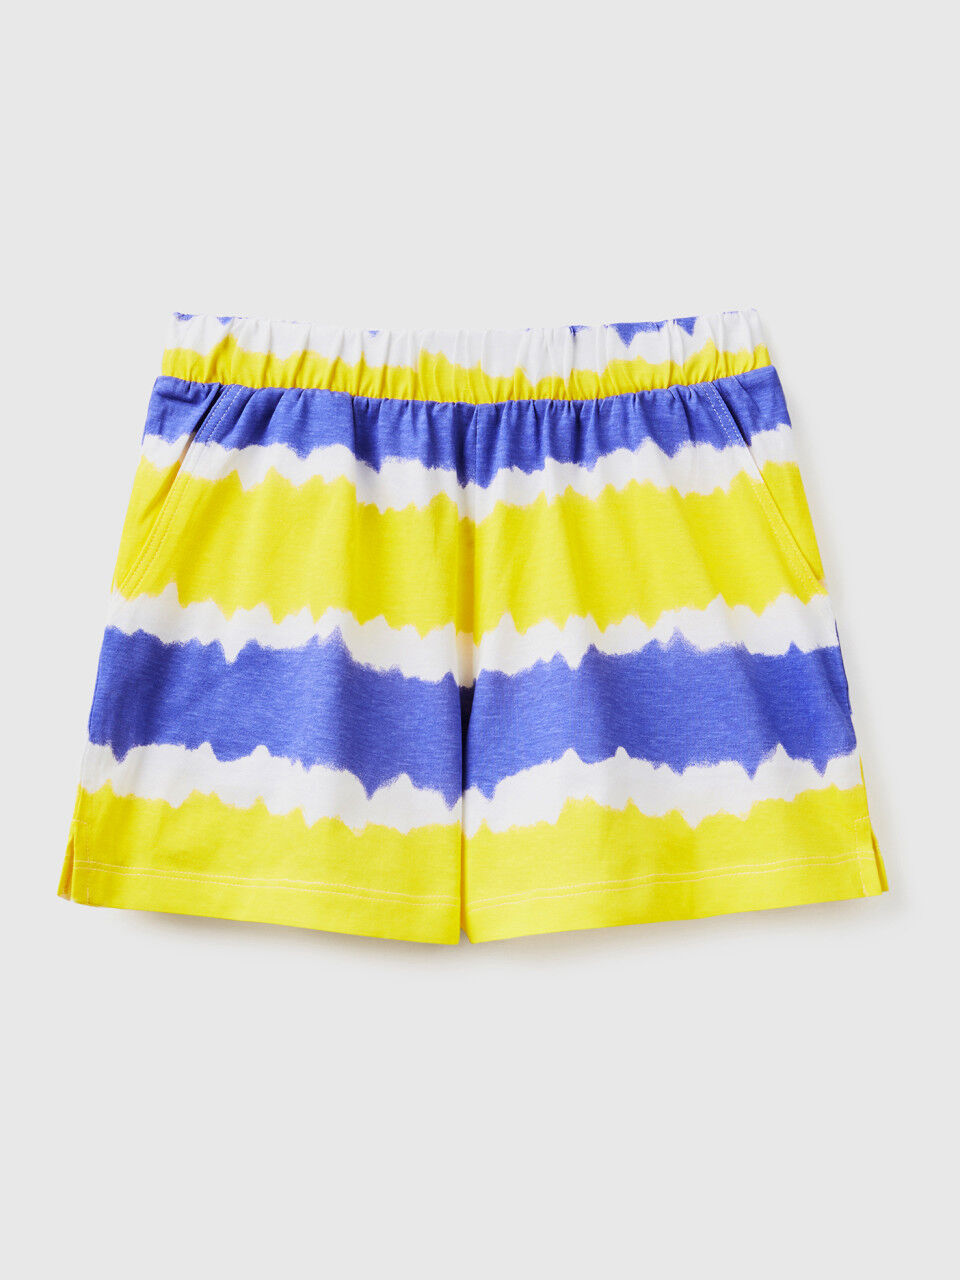 Tie-dye shorts in pure cotton